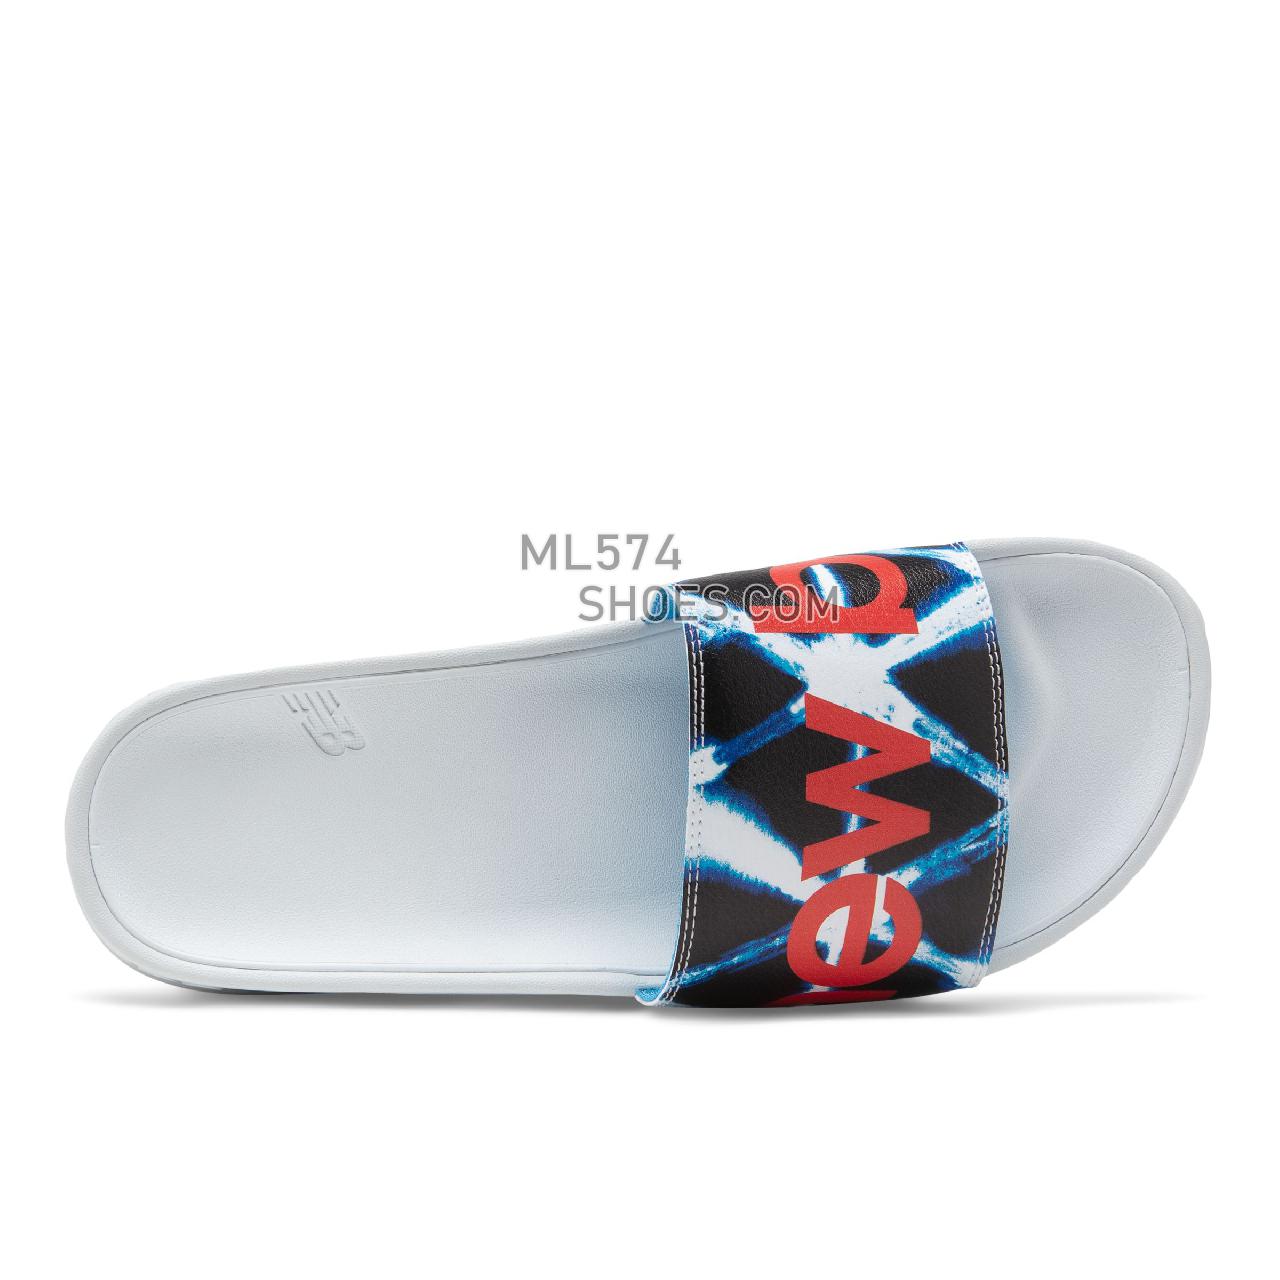 New Balance 200 - Men's Sandals - White with Red and Blue - SMF200VP